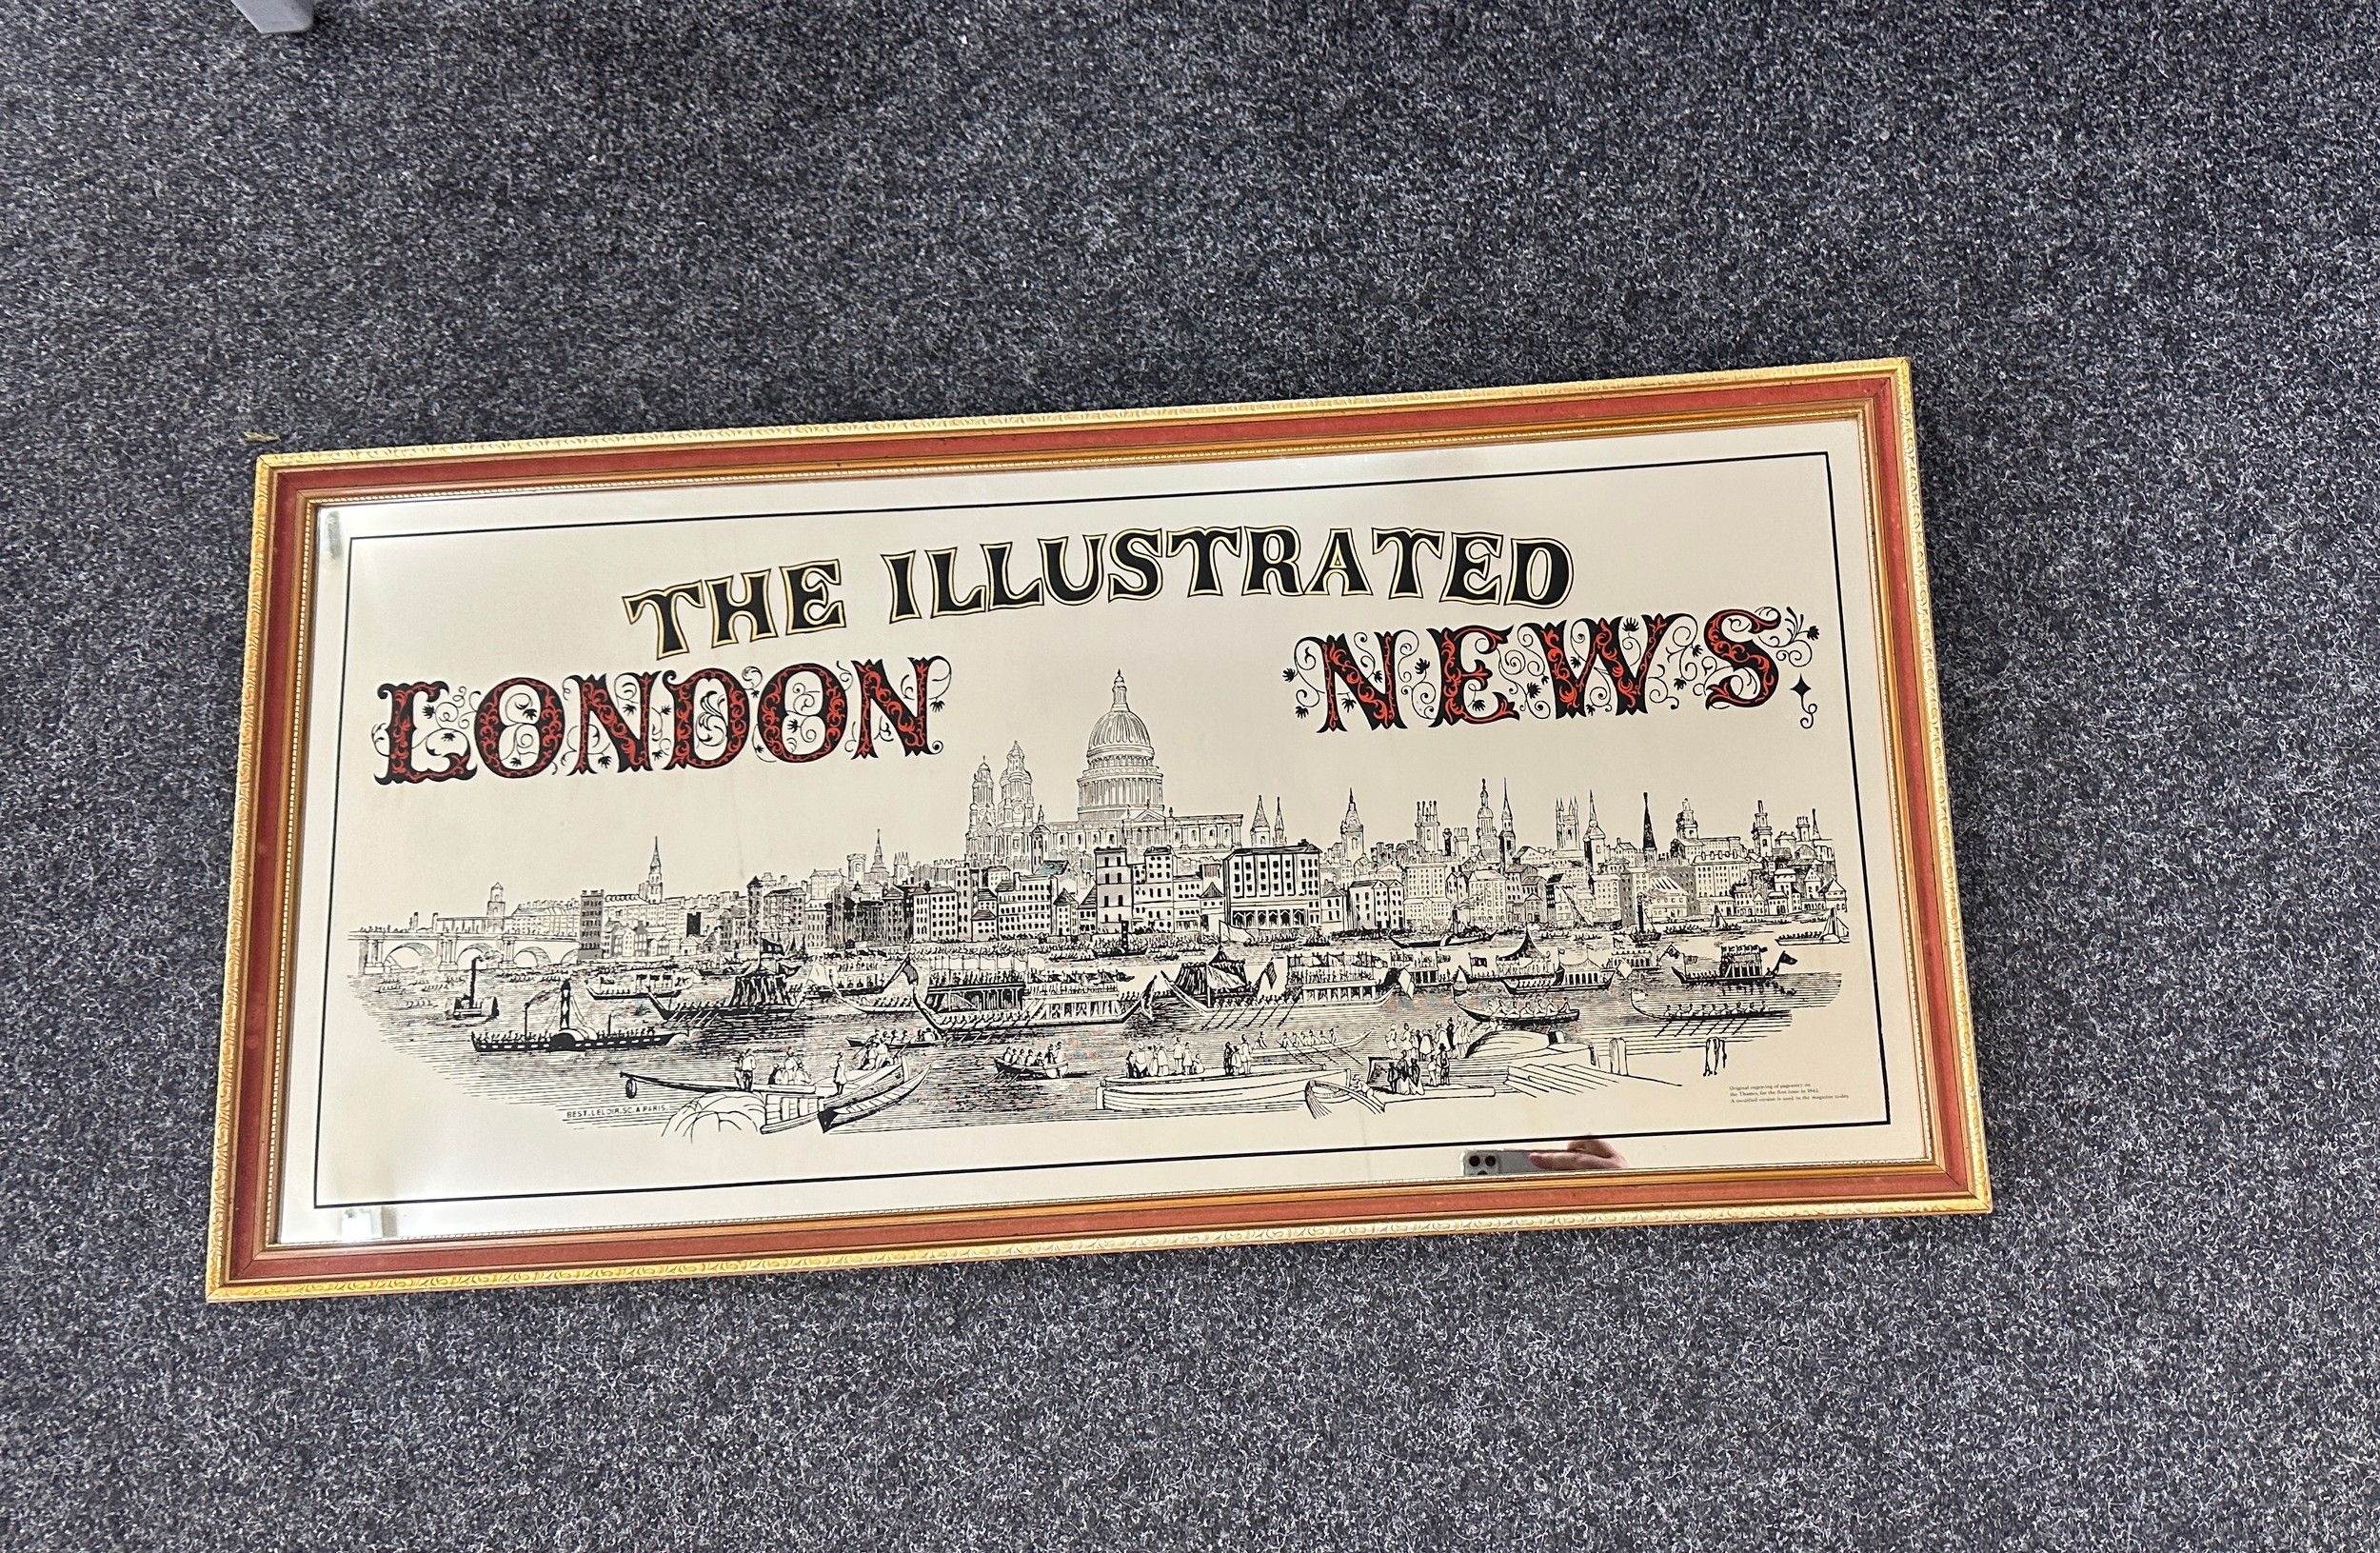 London illustrated news mirror measures approx 42 inches long by 21 wide - Bild 4 aus 5